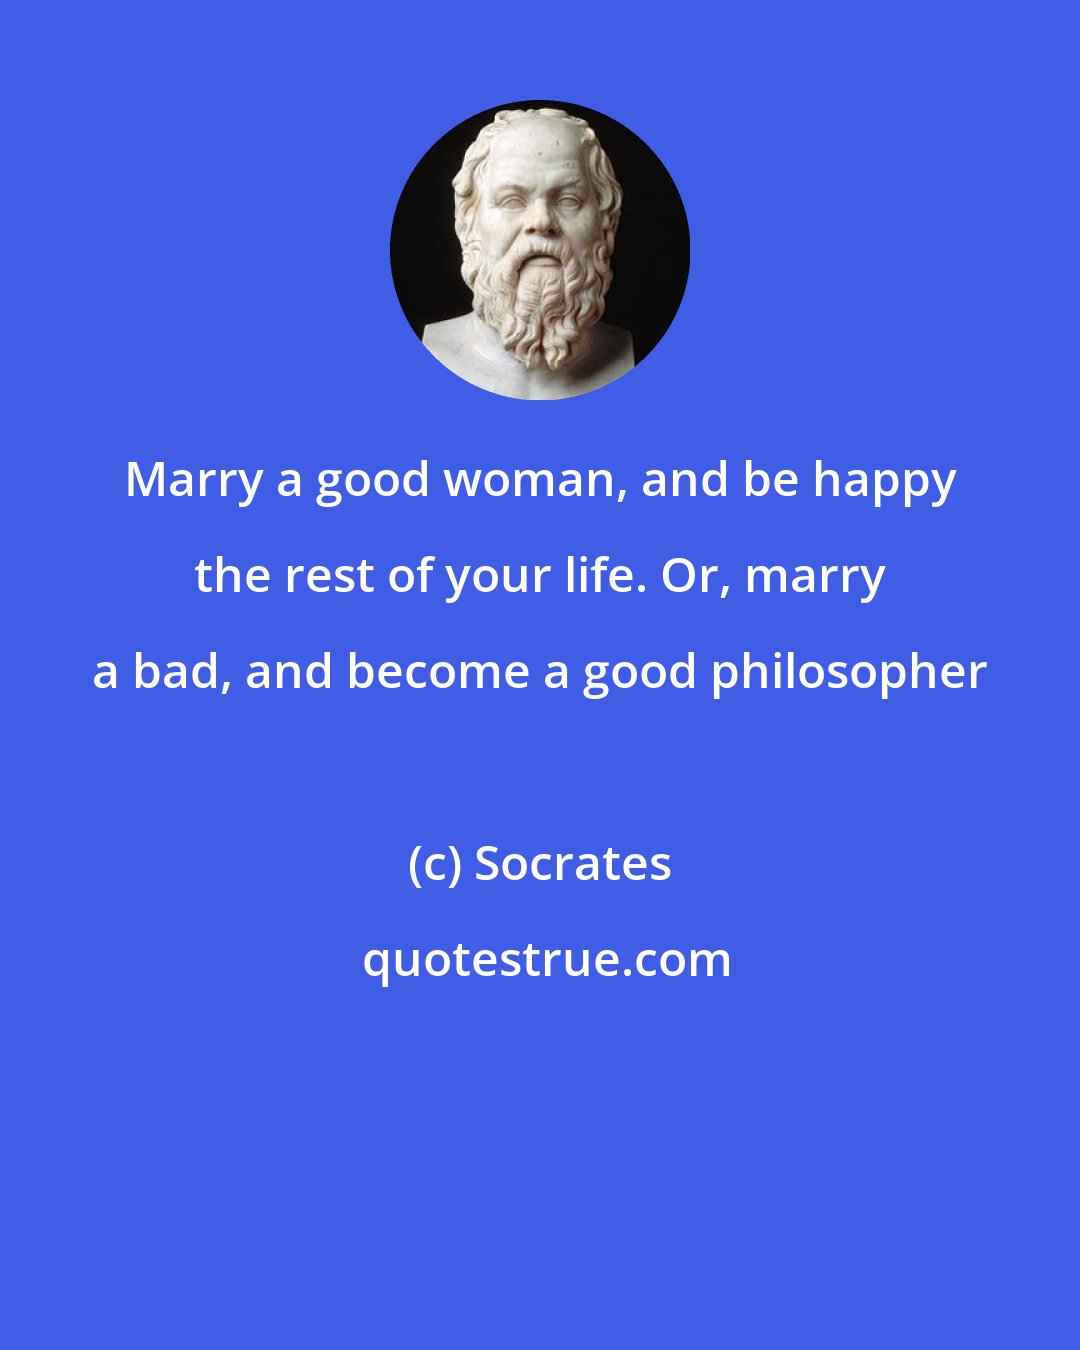 Socrates: Marry a good woman, and be happy the rest of your life. Or, marry a bad, and become a good philosopher